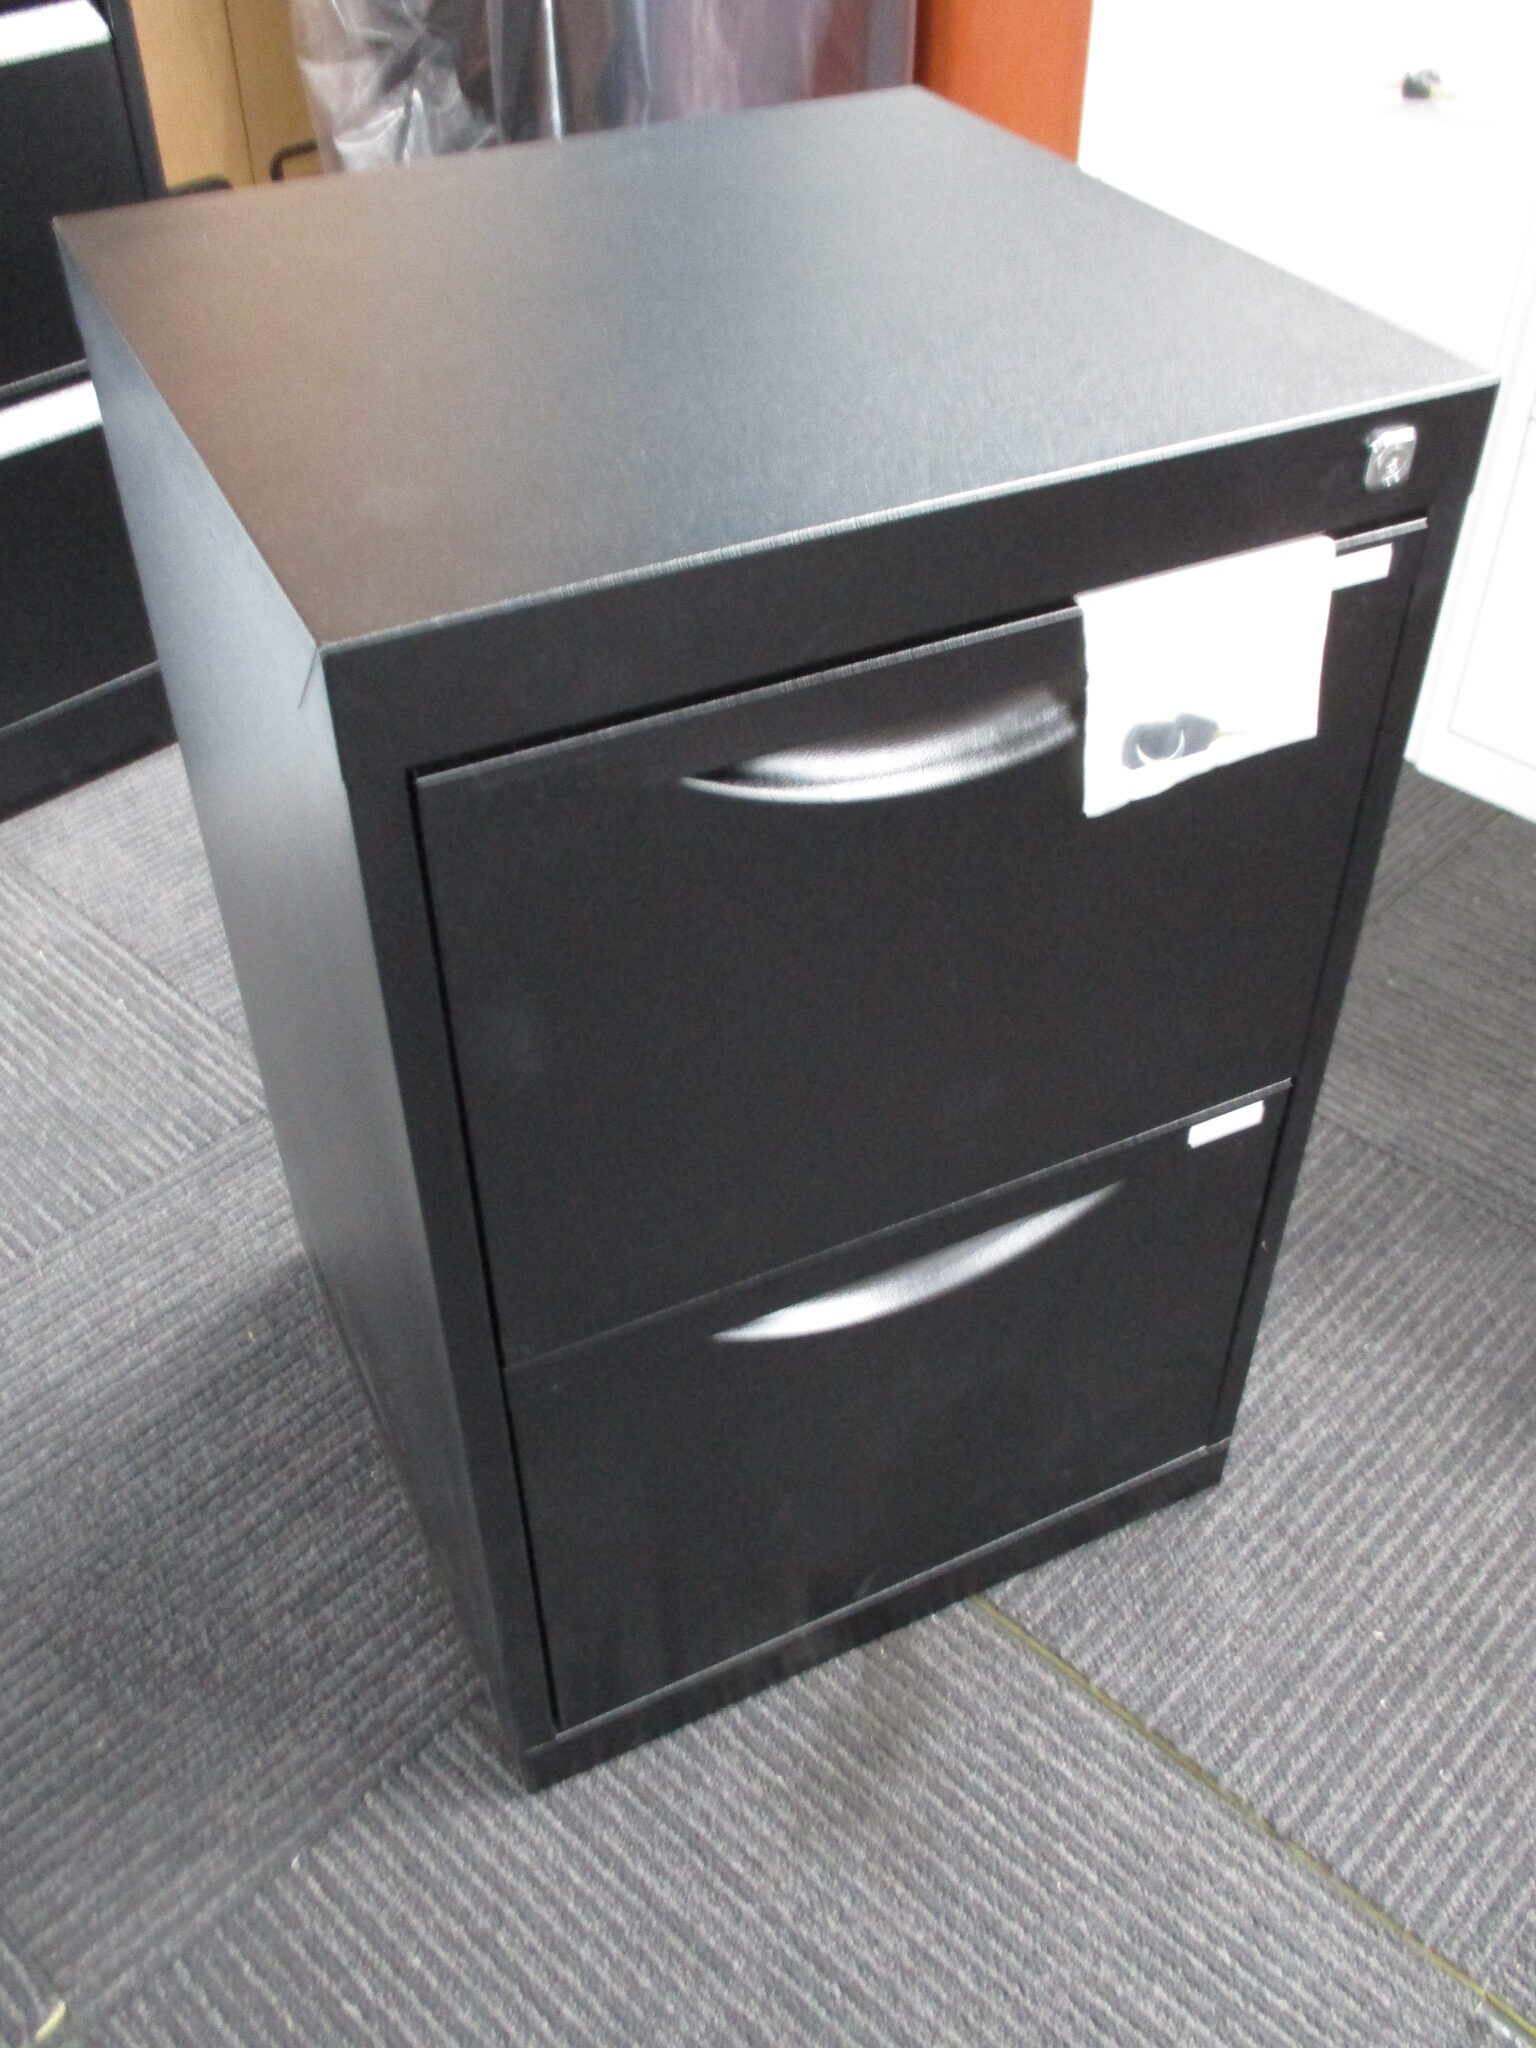 New Black Statewide Homefile 2 Drawer Filing Cabinet $225